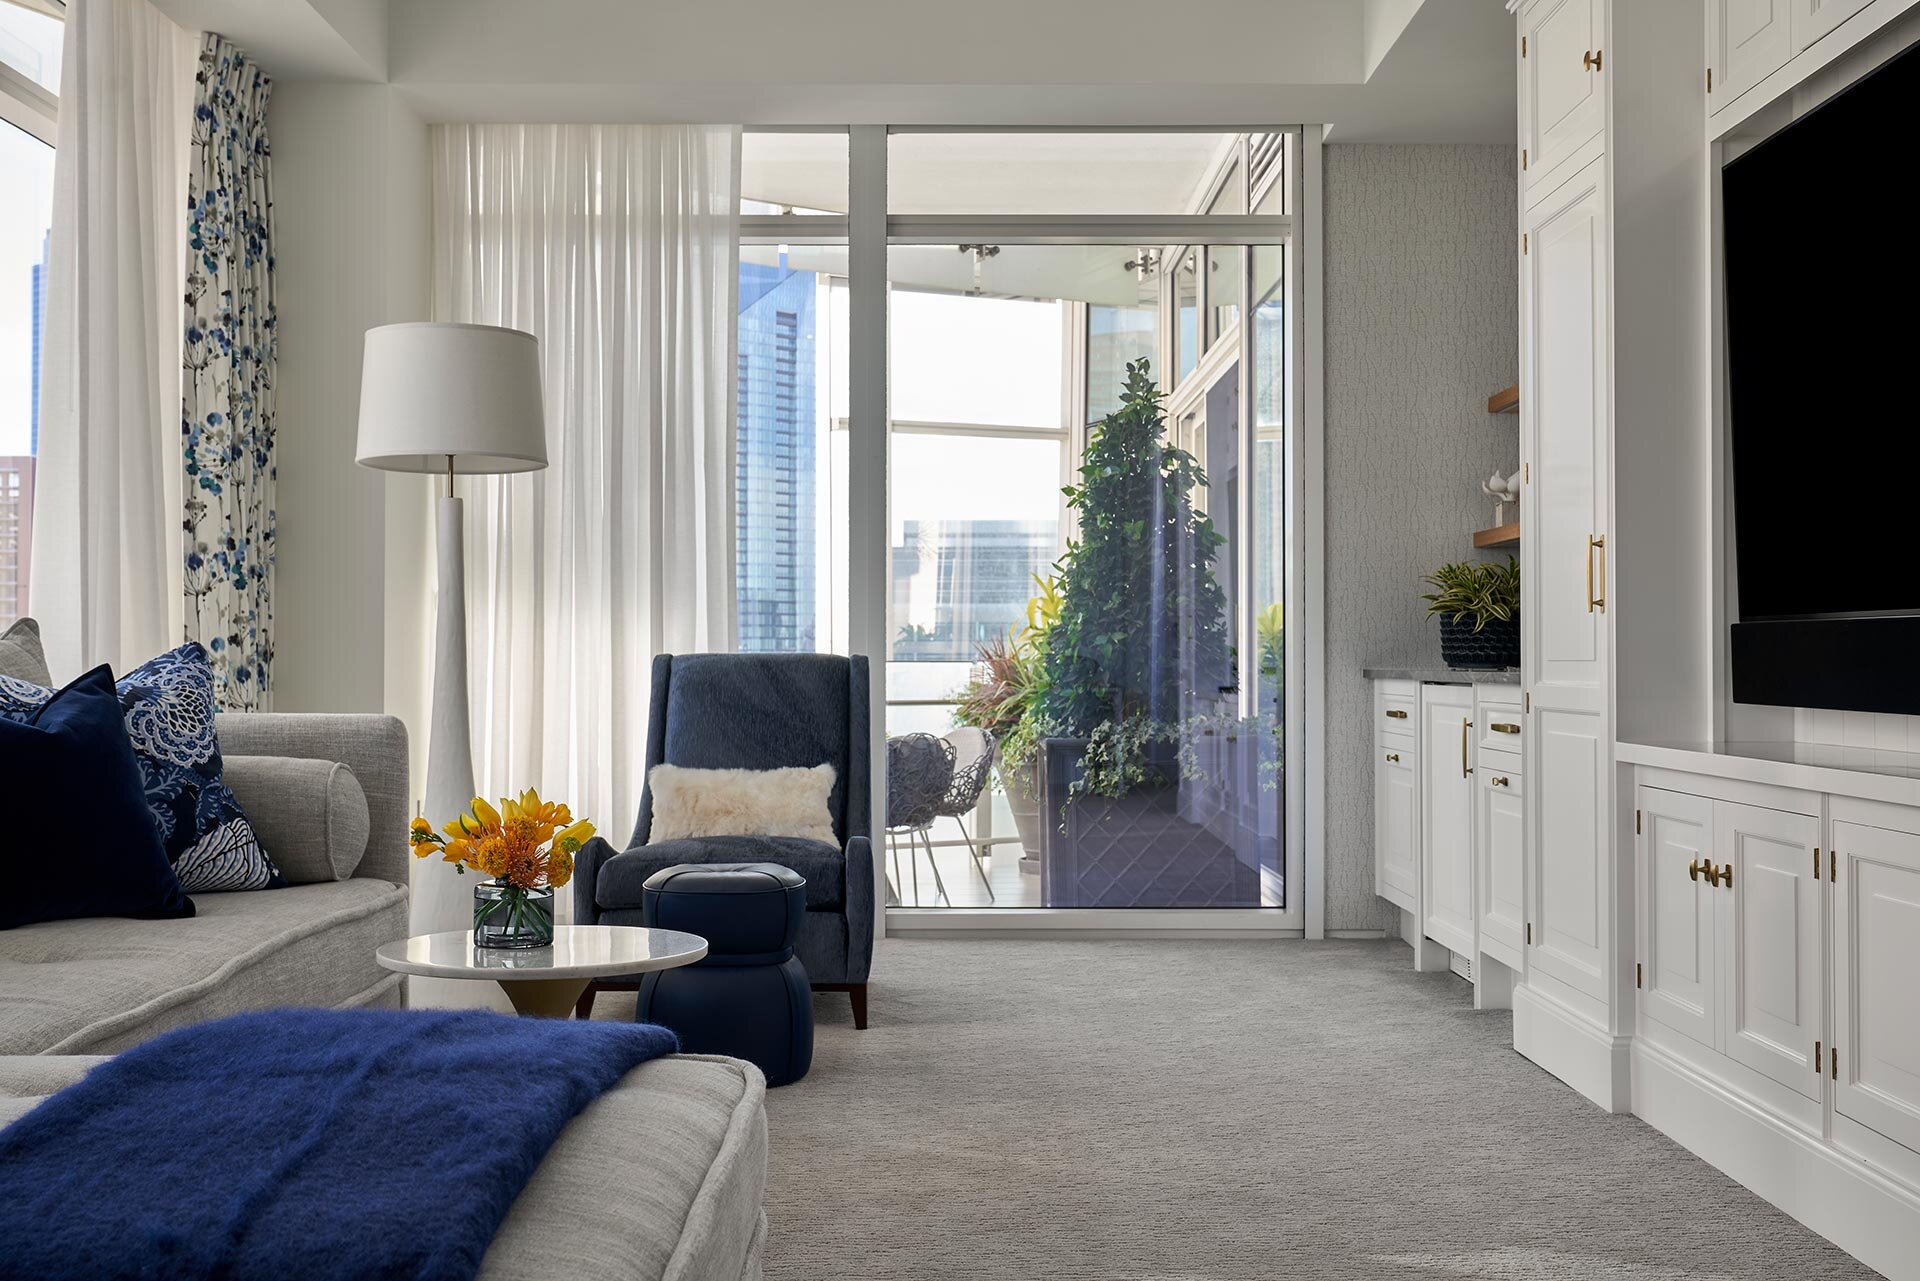  Modern comfortable contemporary bedroom in Museum Tower high-rise in downtown Dallas, Texas by Bernbaum/Magadini Architects 